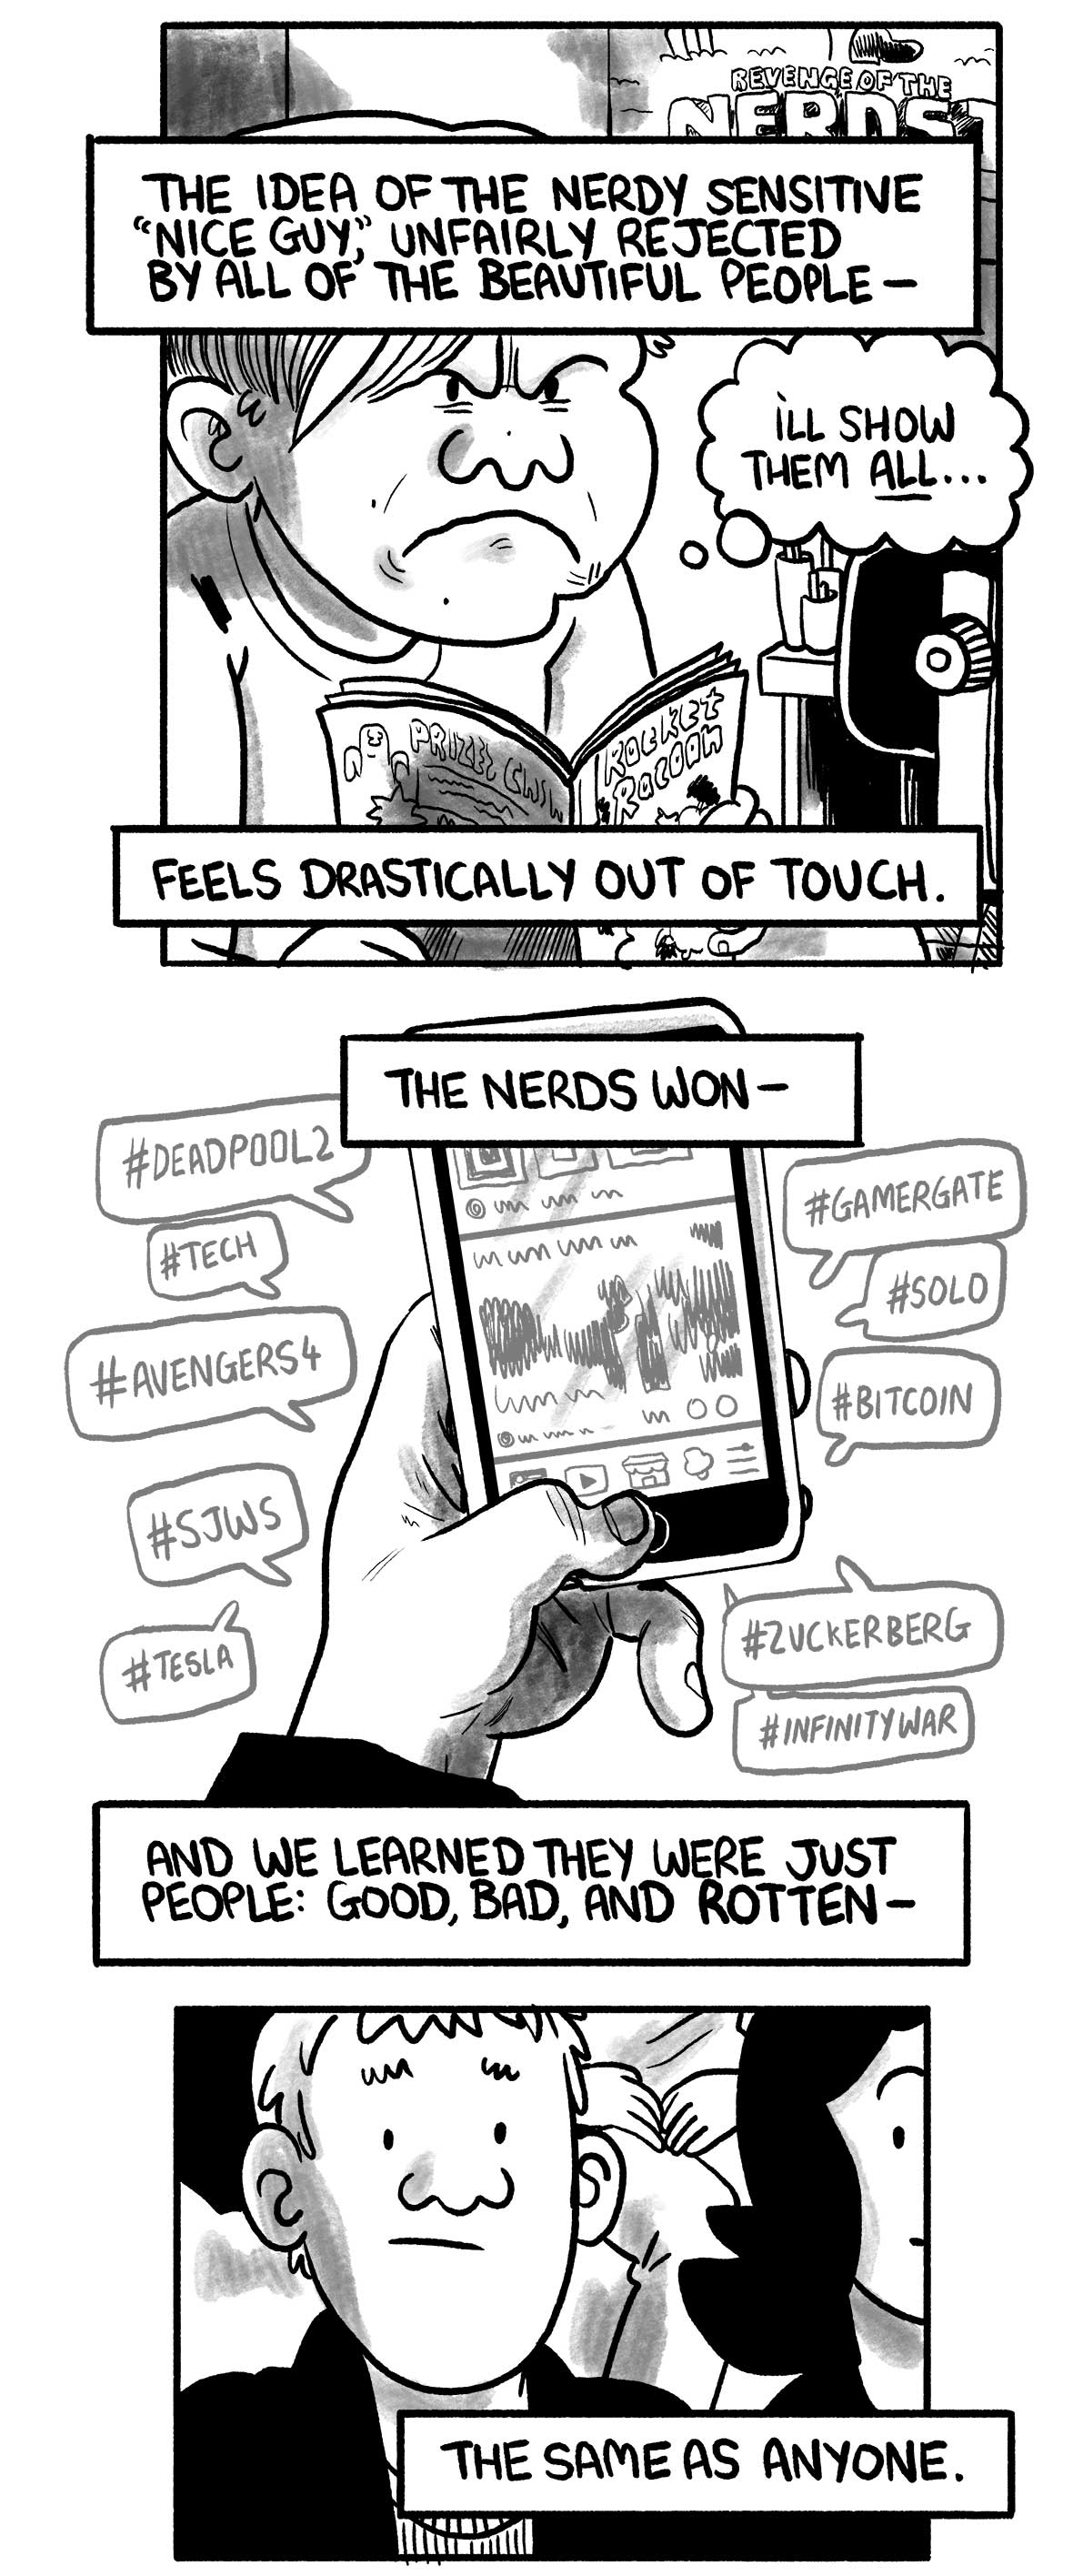 The narrator is depicted as a child again, fuming with a comic book and thinking “I’ll show them all…”  The narrator says: “The idea of the nerdy sensitive 'nice guy,' unfairly rejected by all of the beautiful people—” “Feels drastically out of touch.”  The present-day narrator’s mobile phone displays many hashtags: #deadpool2, #tech, #avengers4, #sjws, #tesla, #gamergate, #solo, #bitcoin, #zuckerberg, #infinitywar  The narrator says: “The nerds won—”  Back at the basketball game, the narrator looks thoughtful “And we learned they were just people: good, bad, and rotten—” “The same as anyone.”